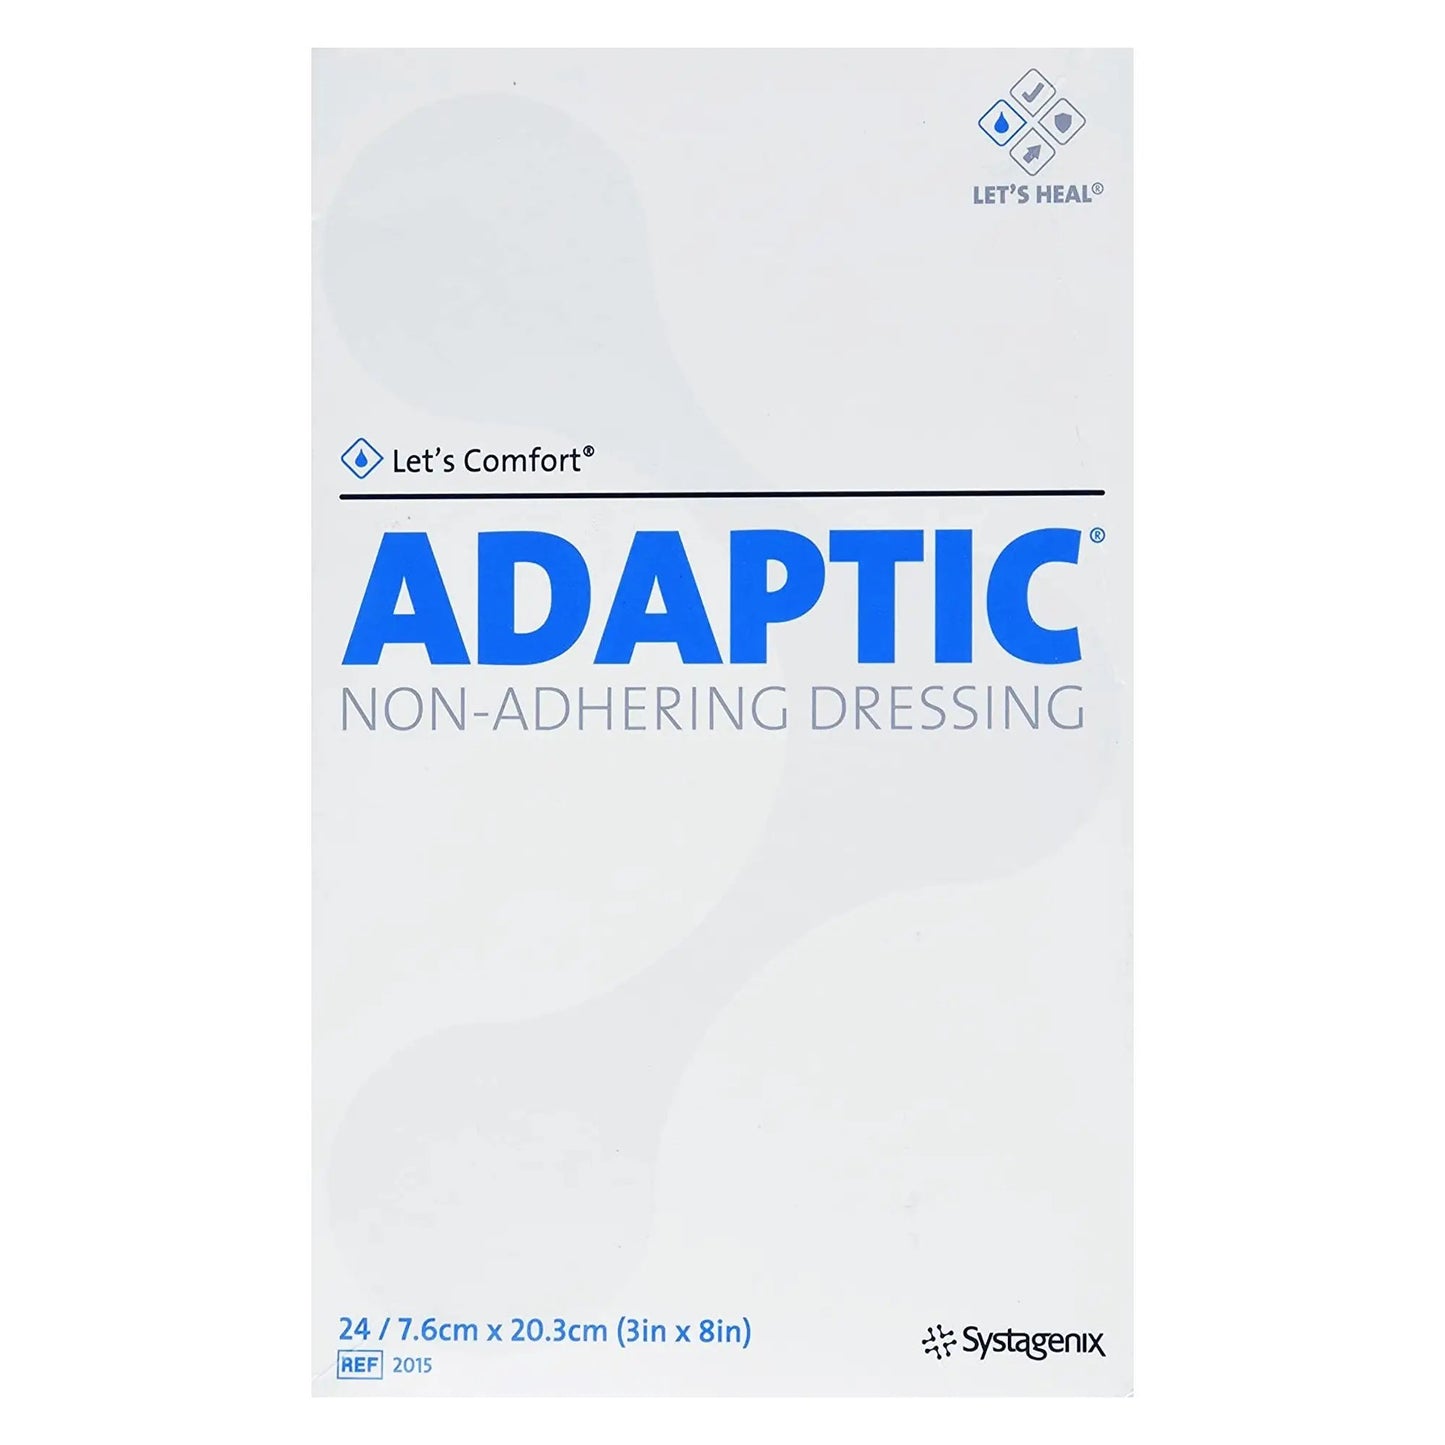 Systagenix Adaptic Sterile Non-Adherent Gauze Dressing, 3 x 8 Inch